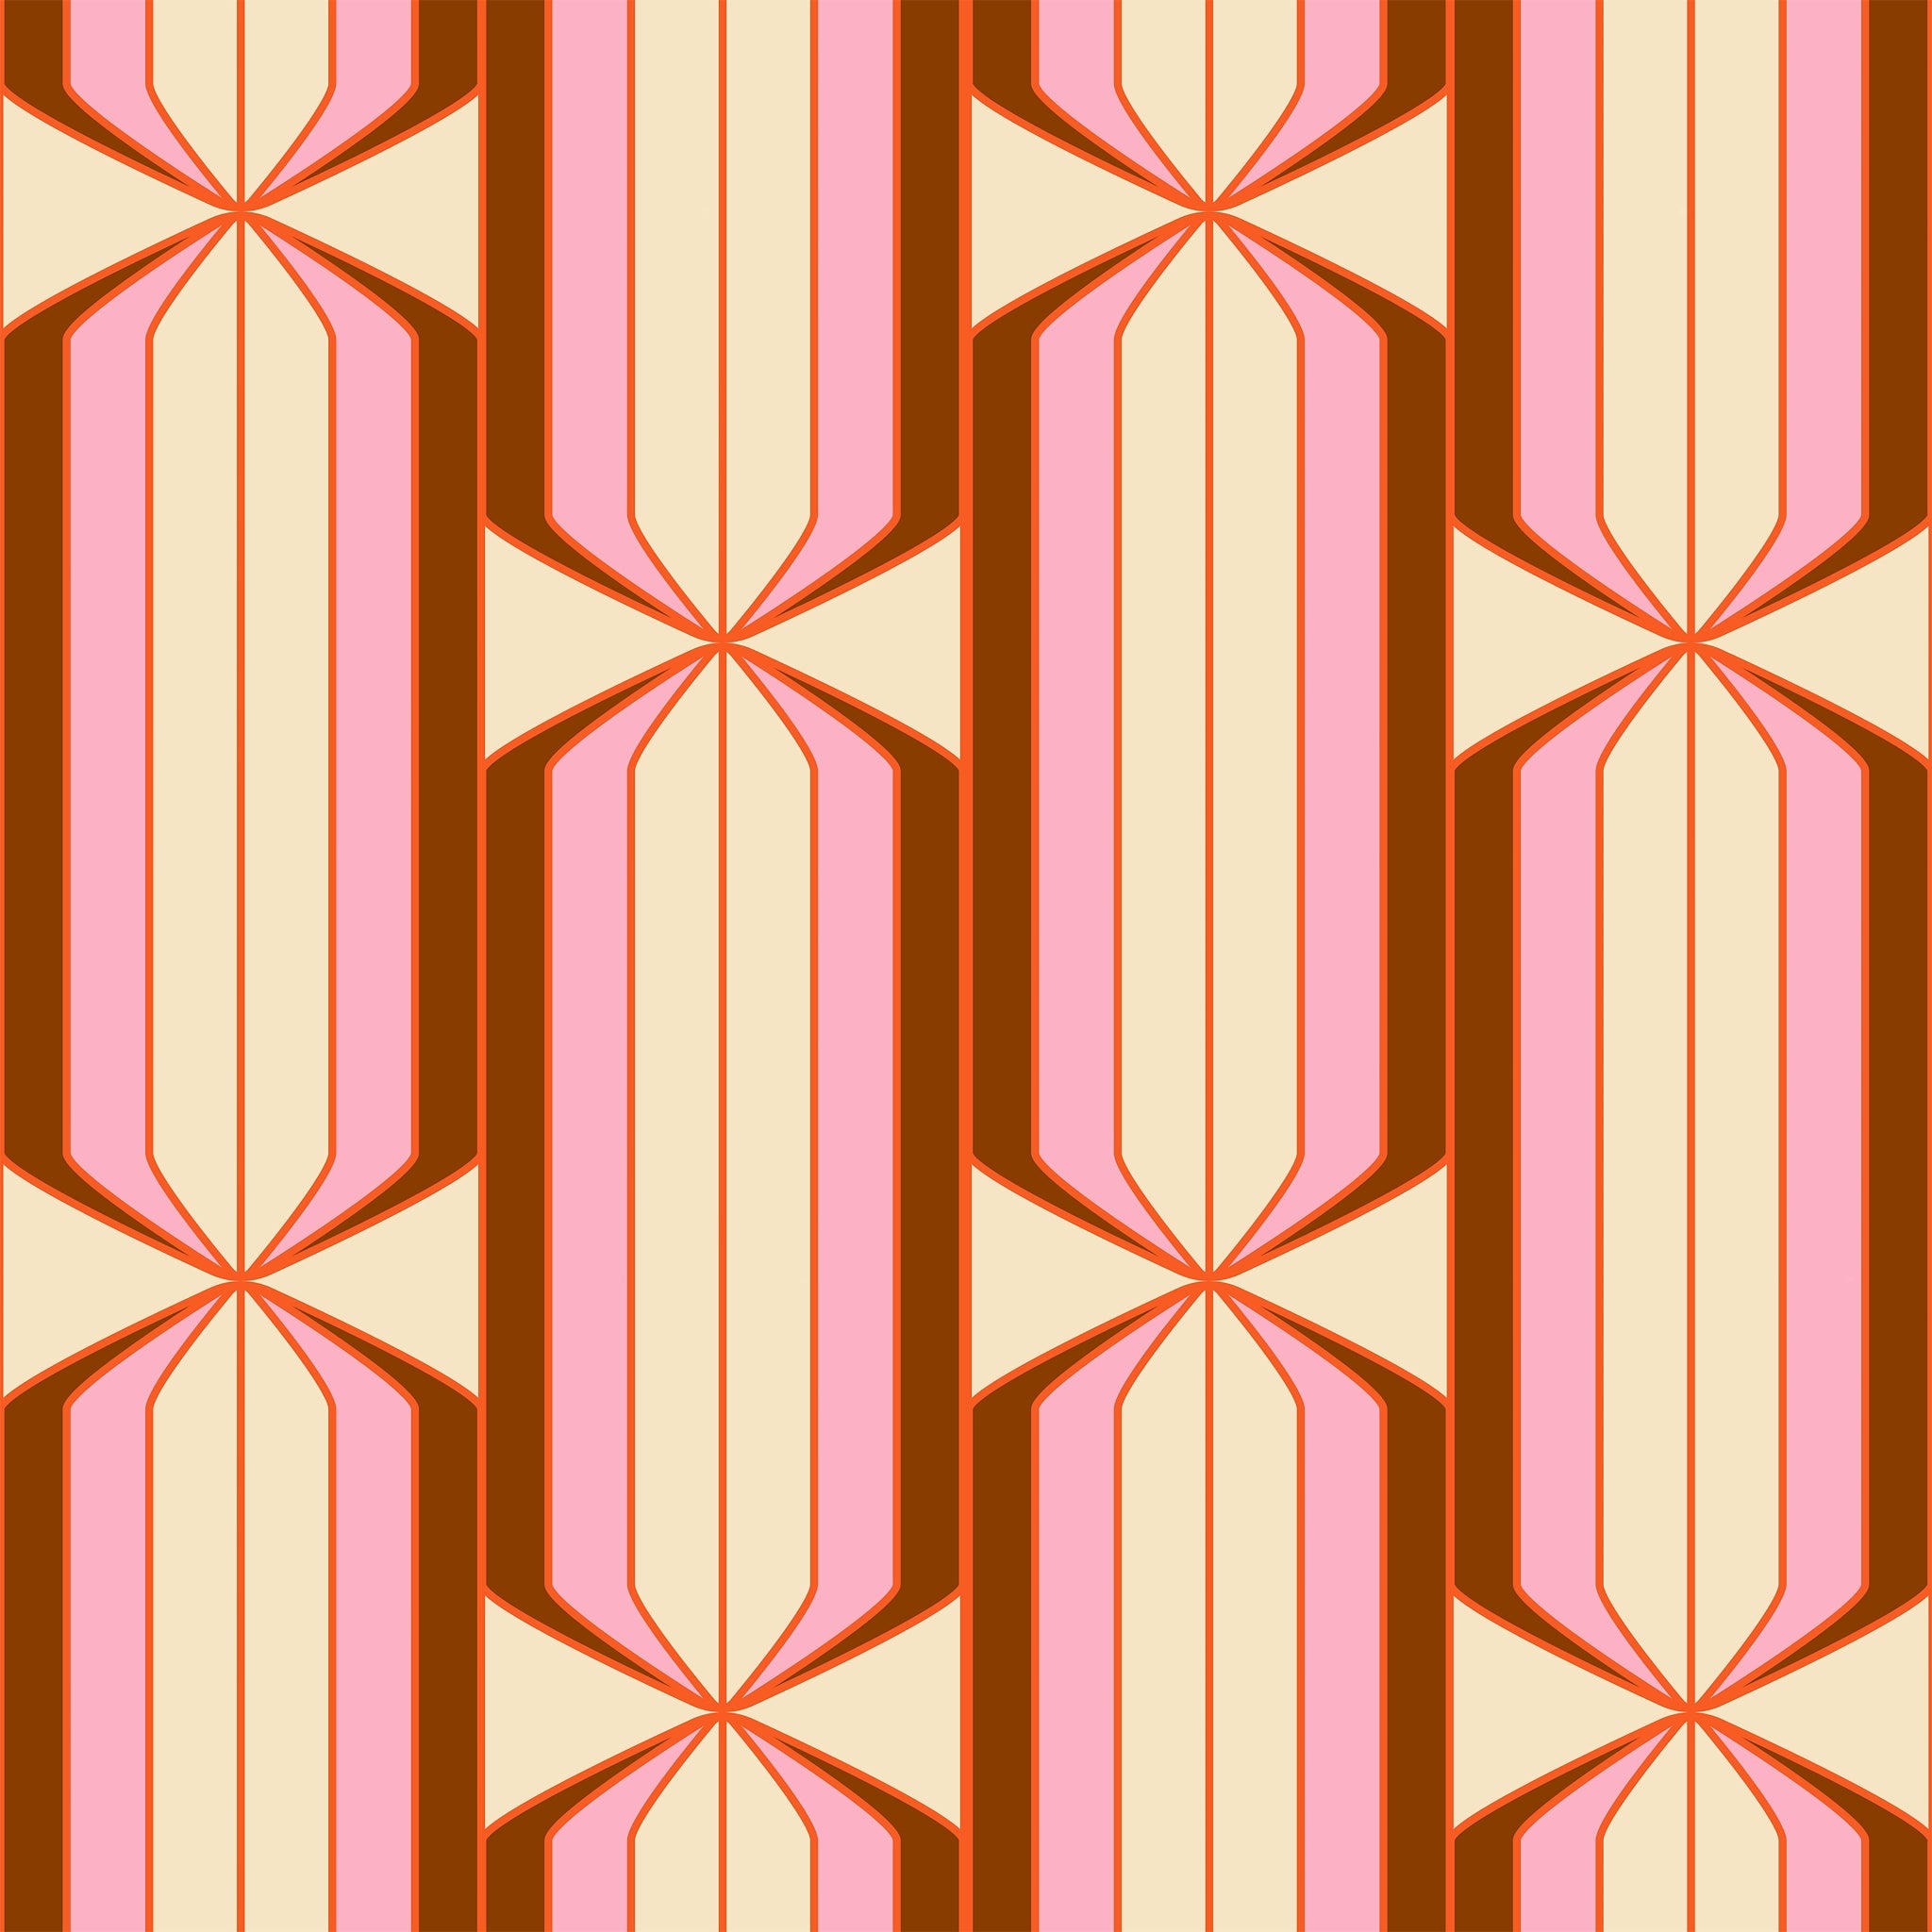 "Felicity Wallpaper by Wall Blush in a modern living room, geometric orange and pink patterned design."